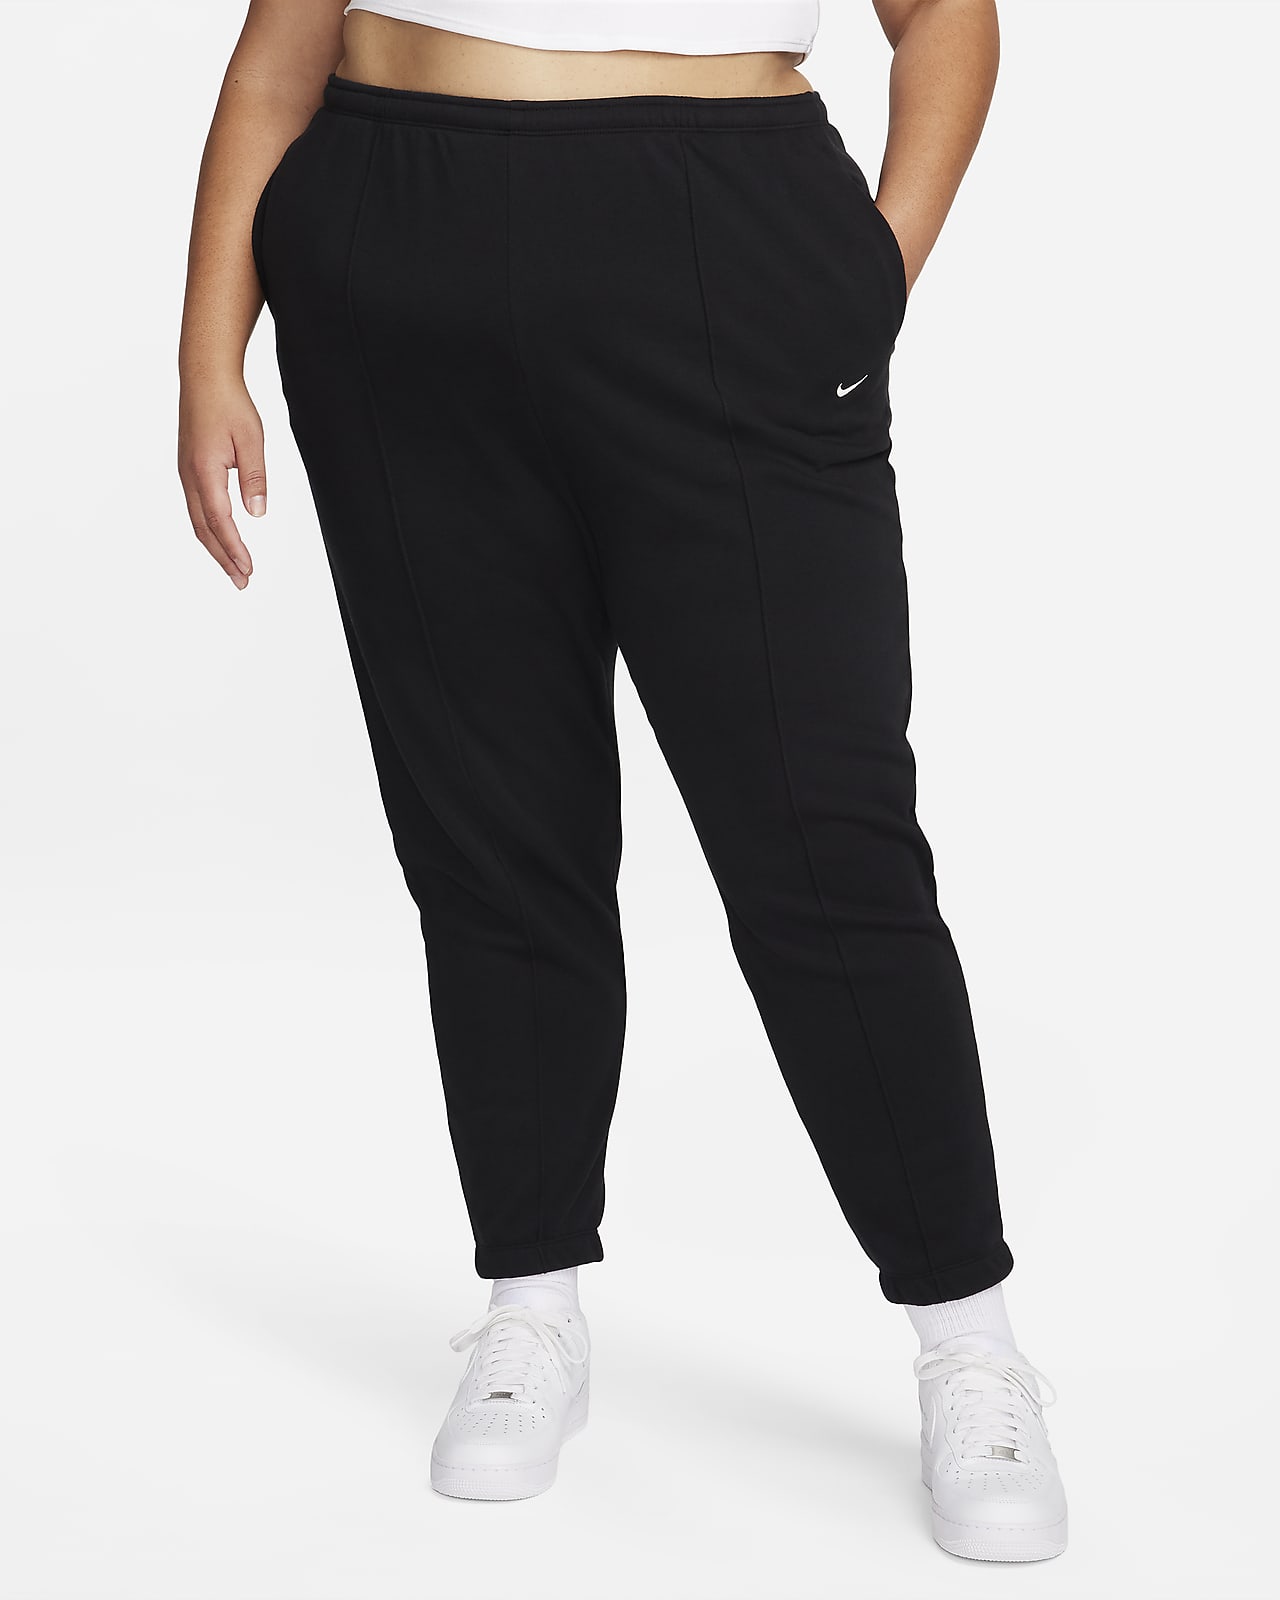 Plus Size Joggers Elastic Off White Men's Track Pants With Zipper Pockets -  XMEX Clothing